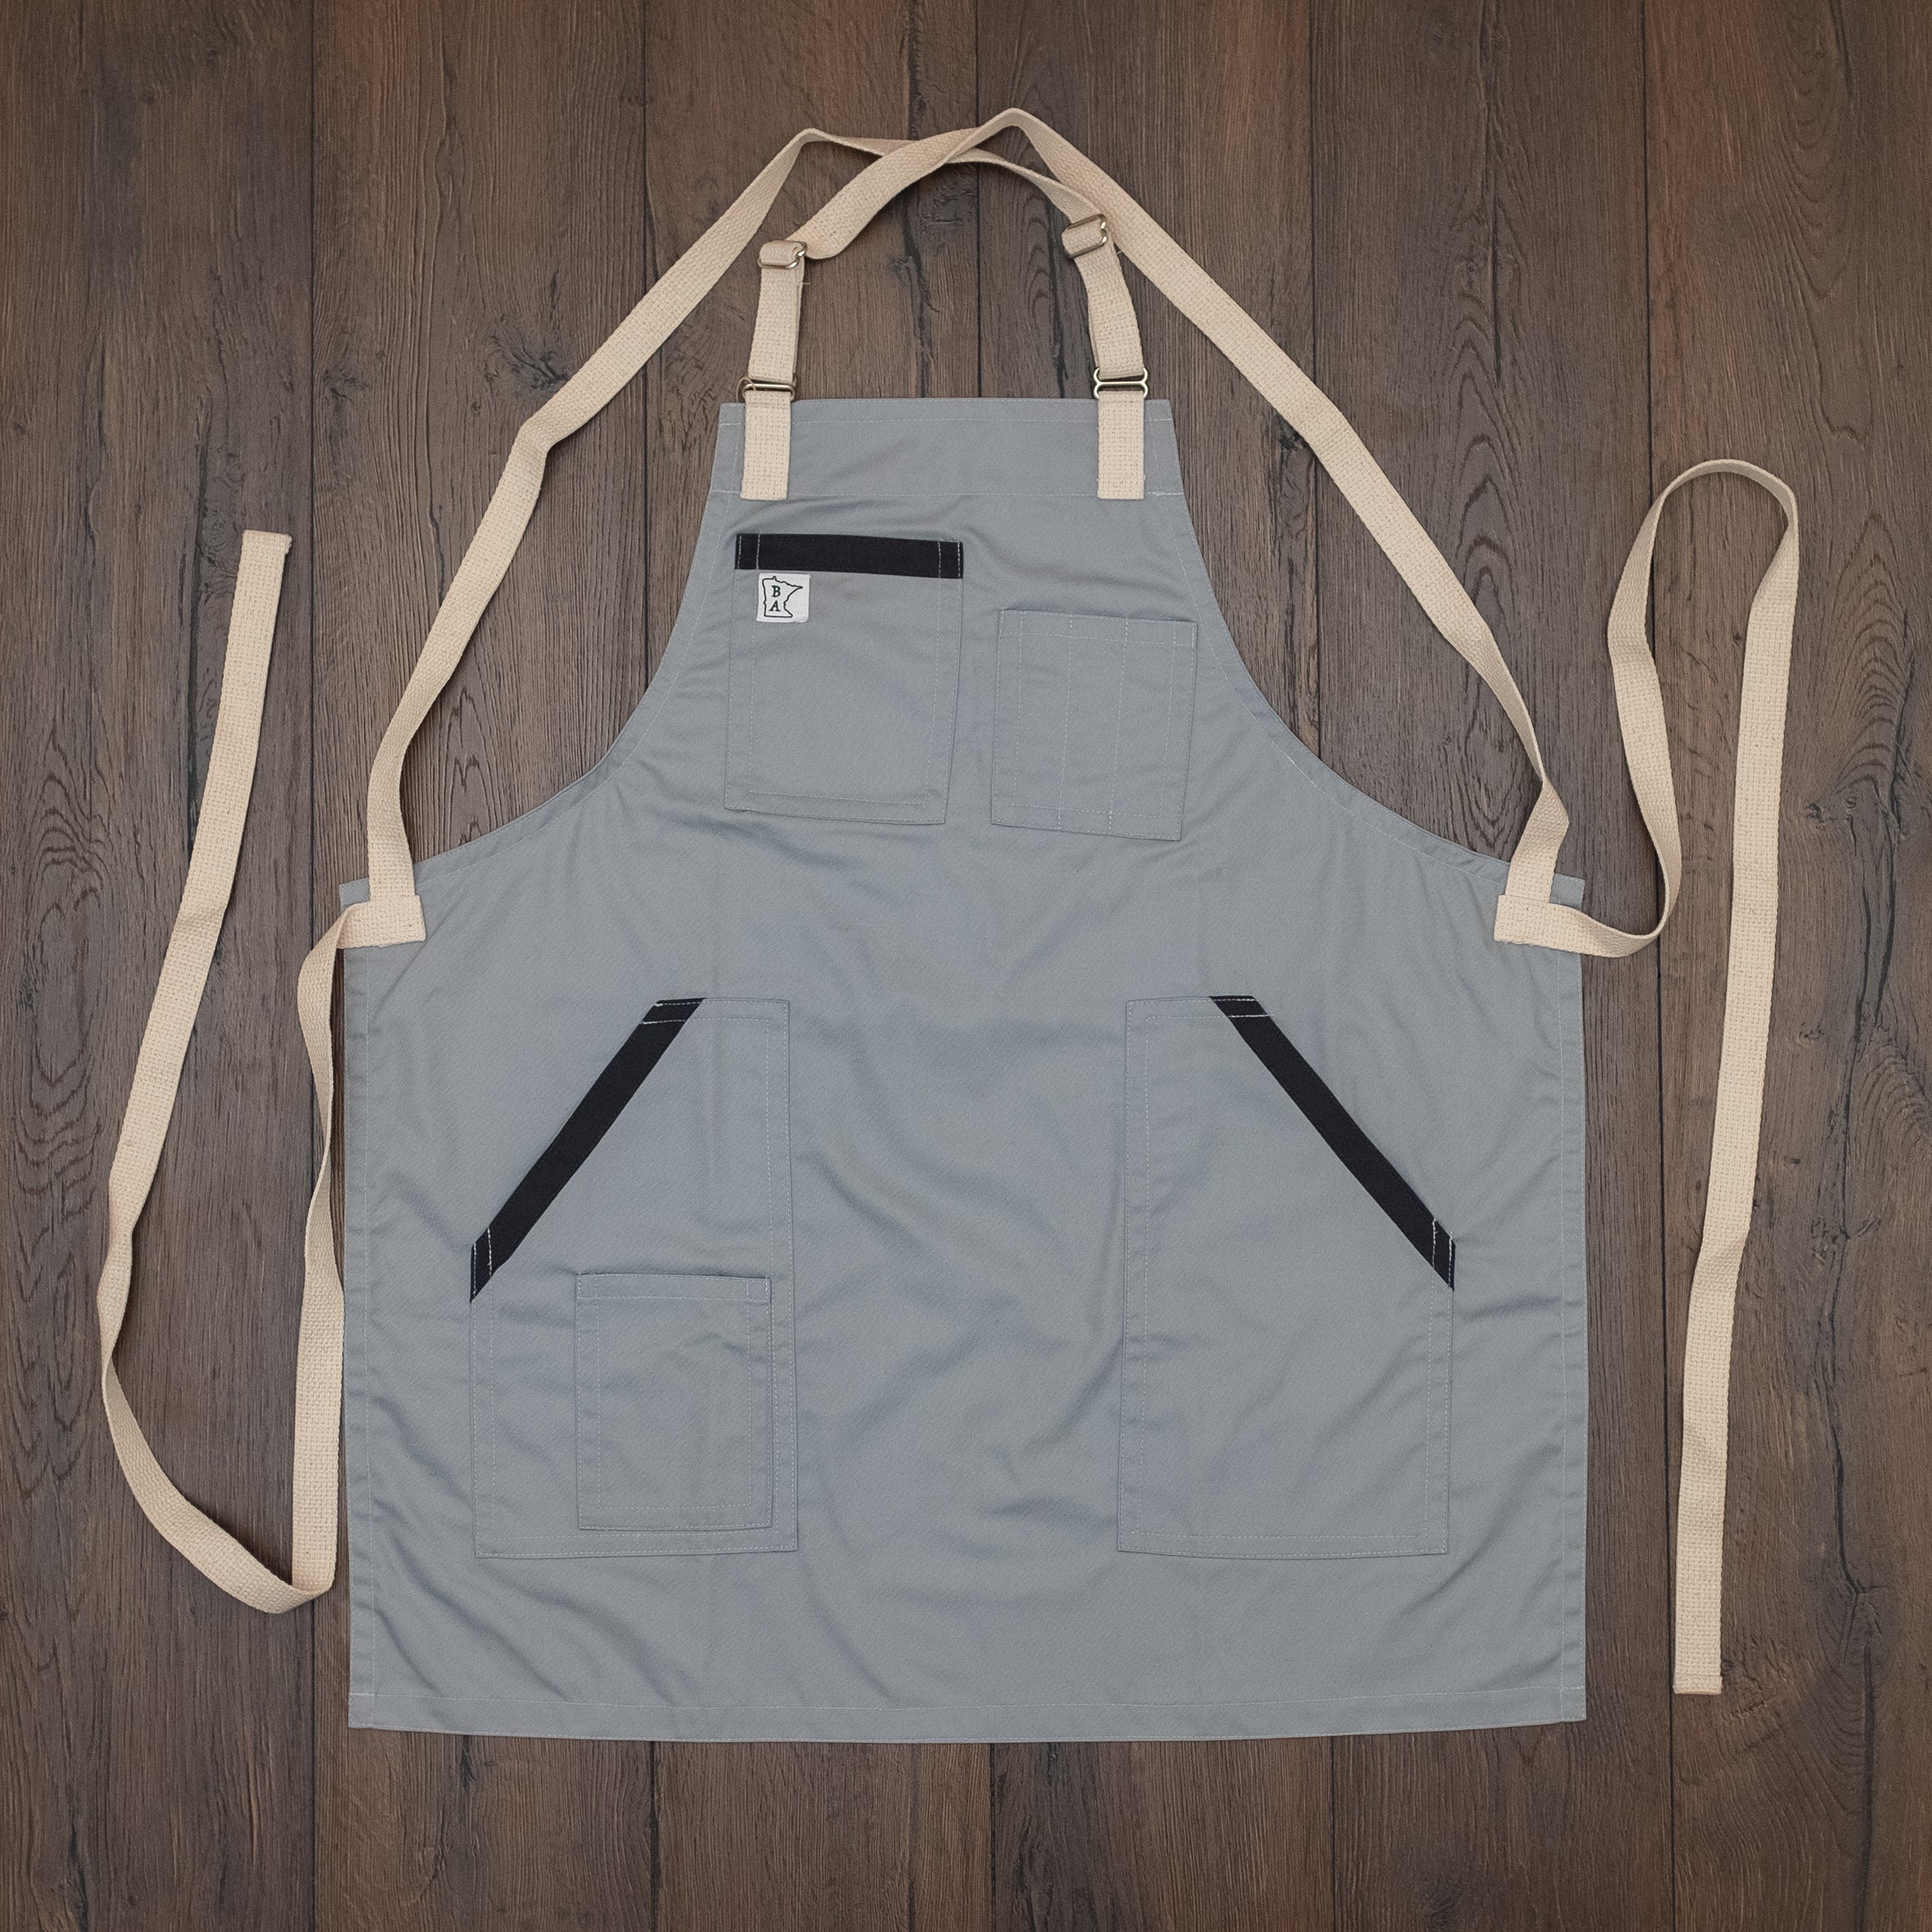 Cotton/poly apron with charcoal trim on the pockets and natural colored strapping laid out flat on a wooden surface. Design Cloudy With a Chance by Craftmade Aprons, based in Minnesota.